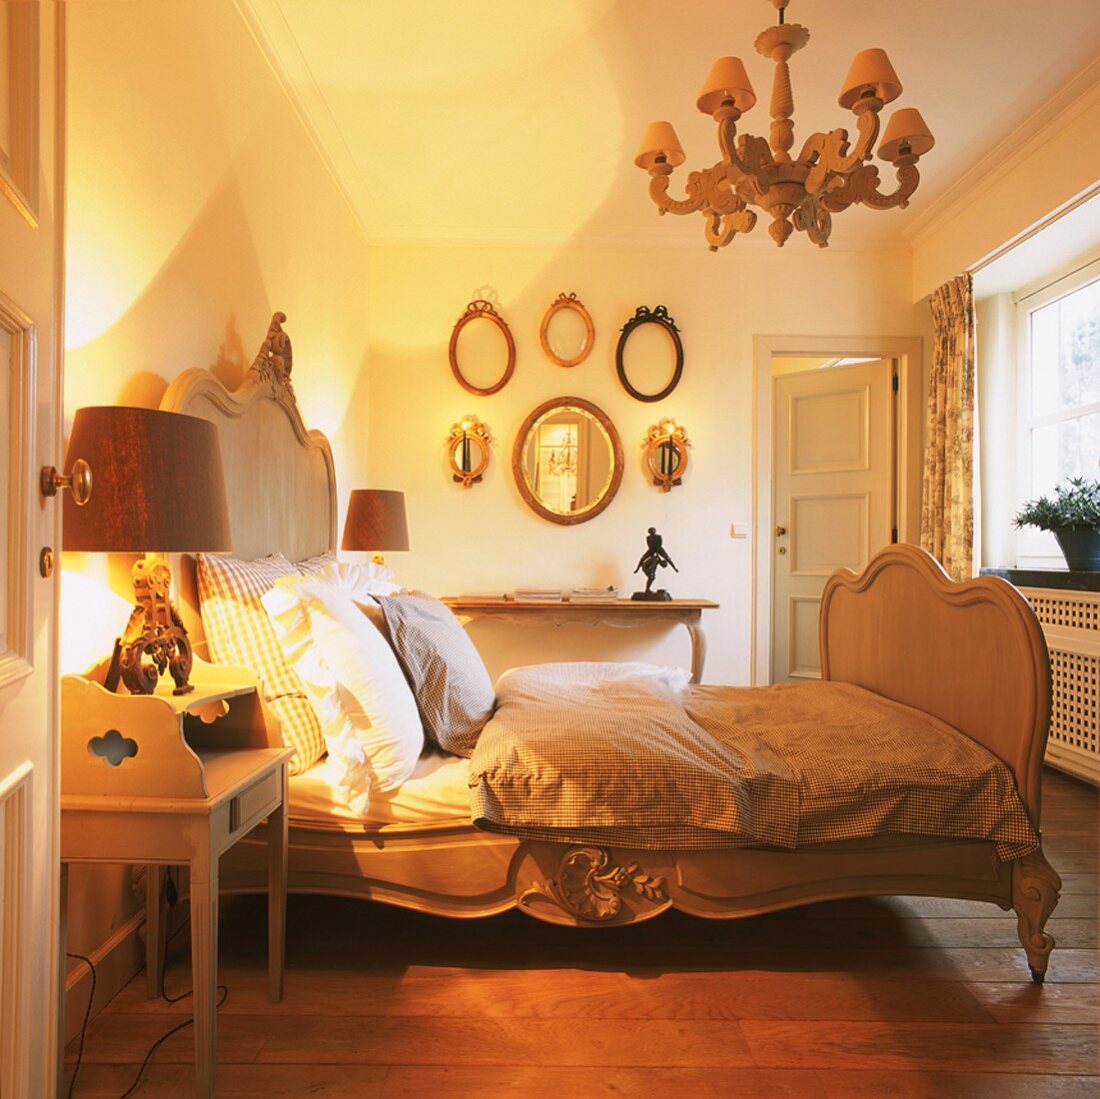 Bedroom with Baroque-style wooden bed and rustic bed linen